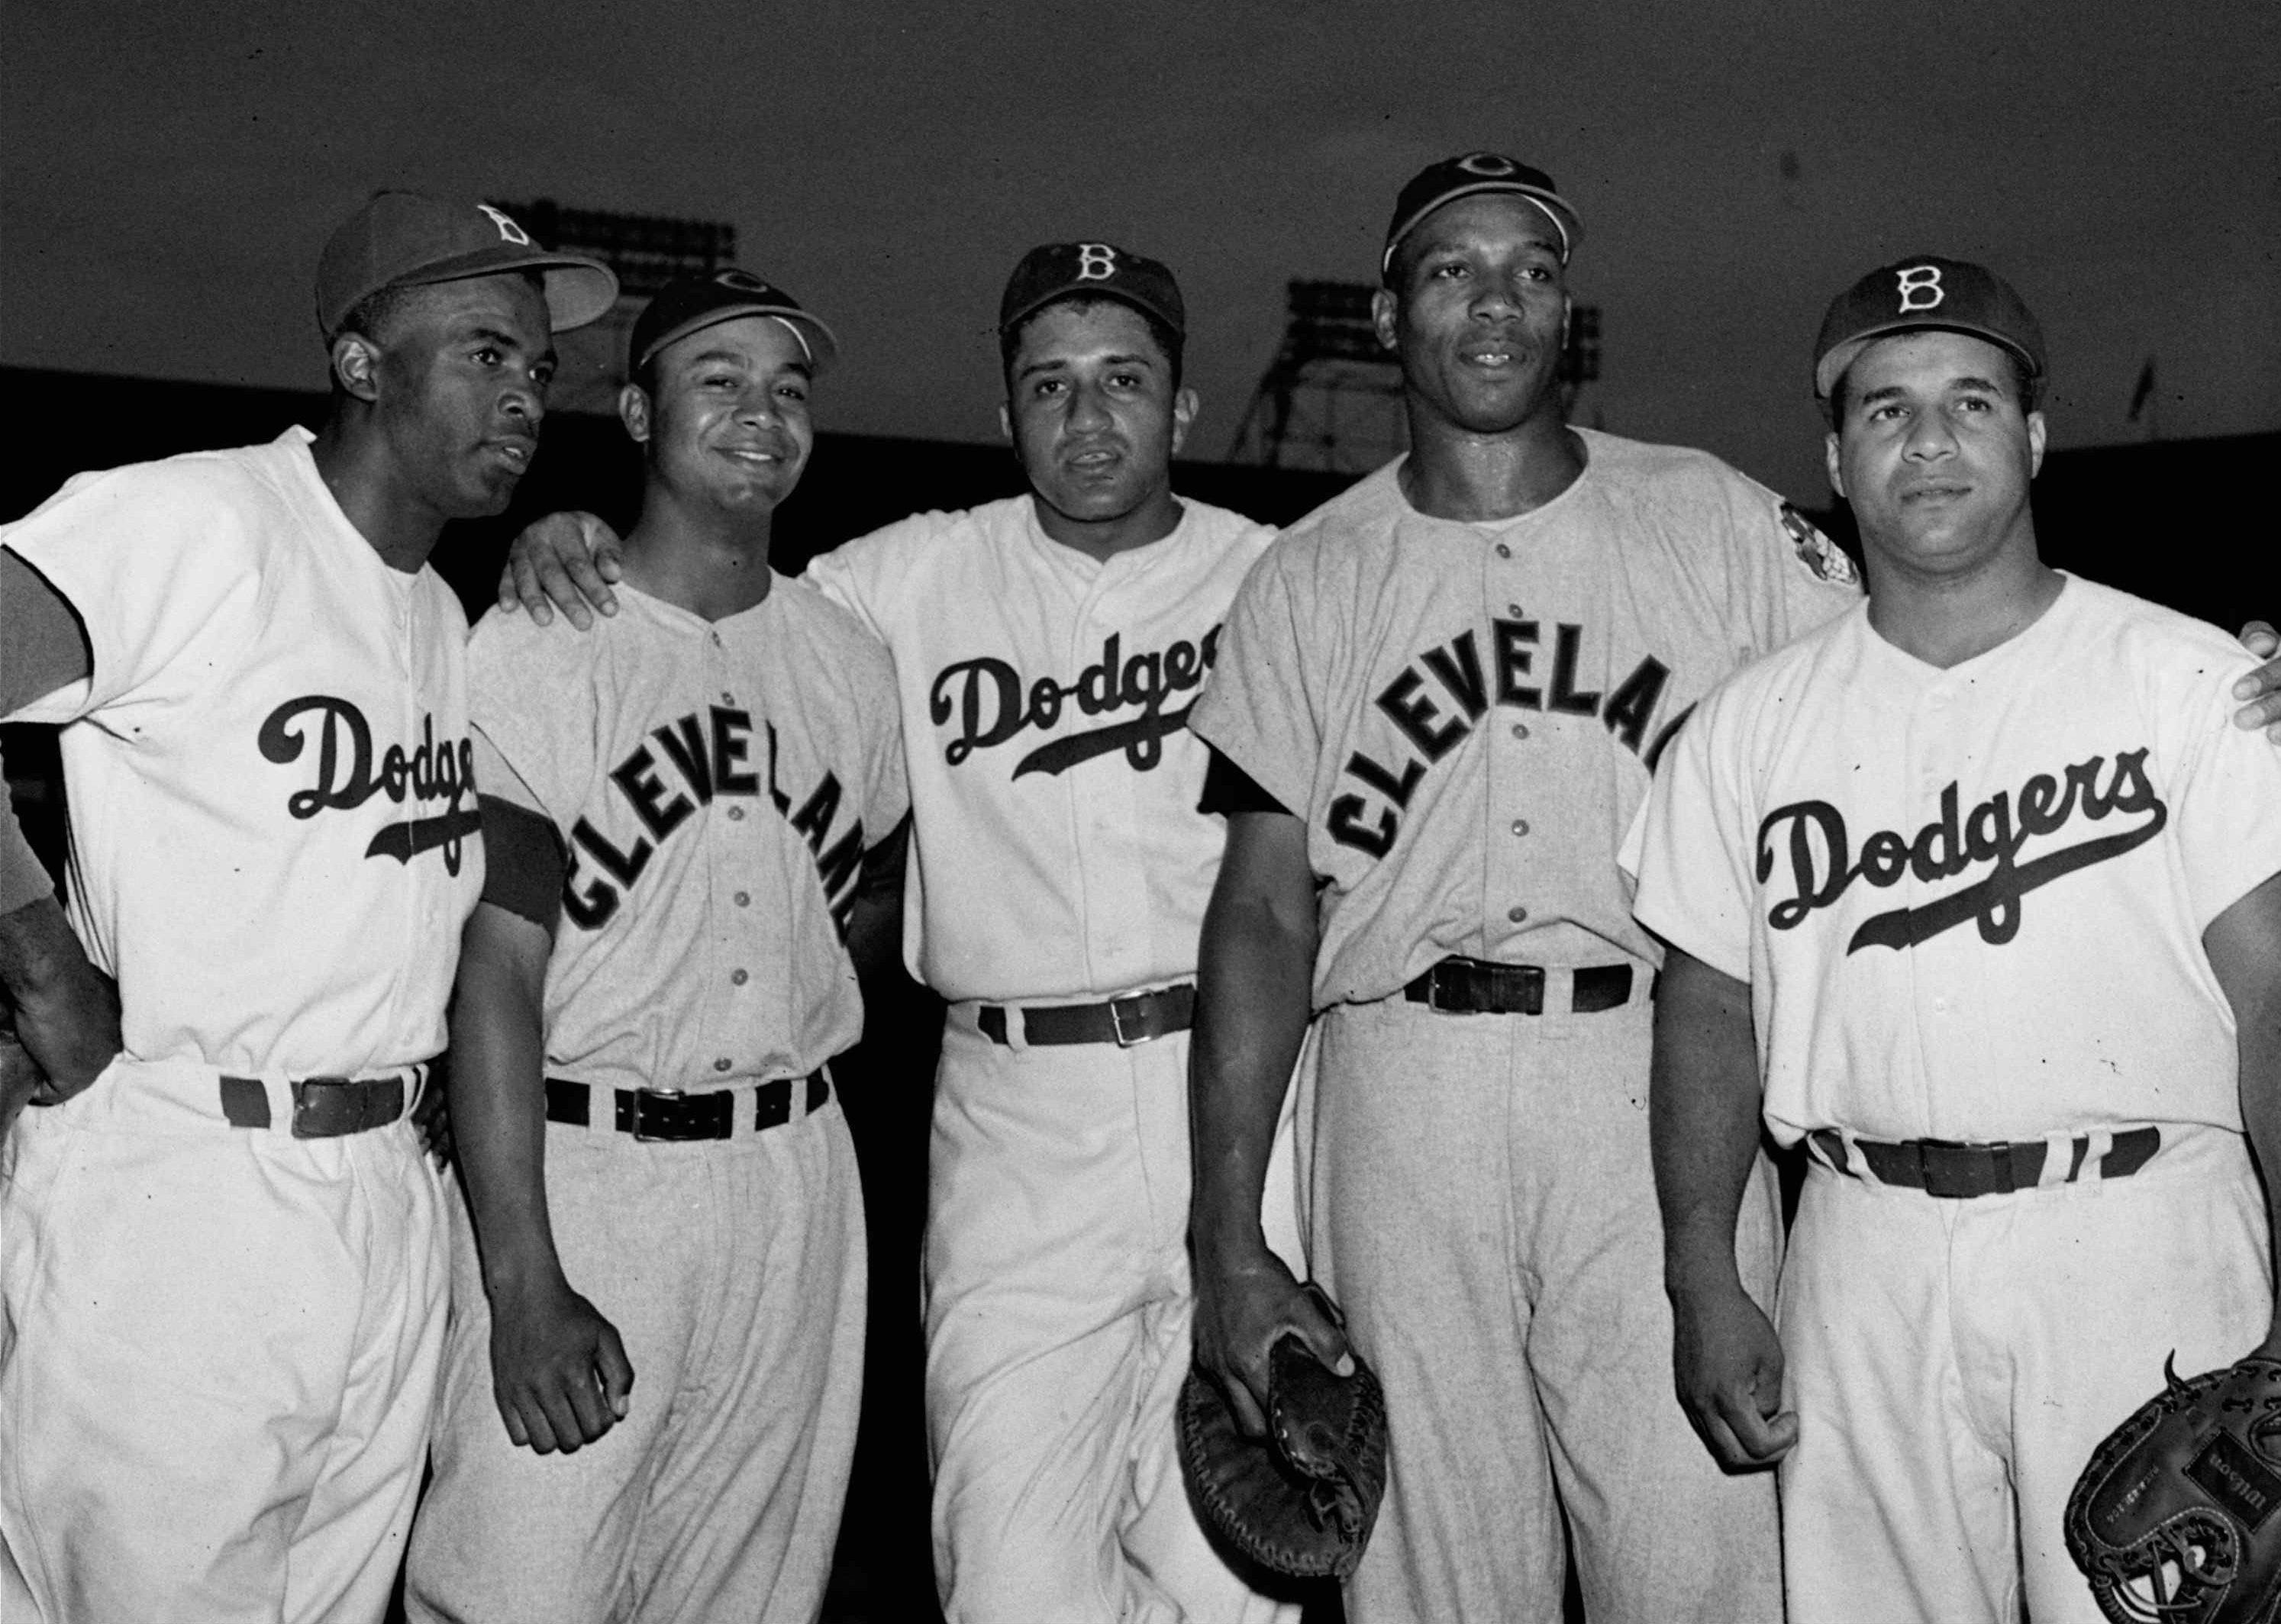 'We may wake up some morning with no ball club': Integration assured demise of Negro league baseball